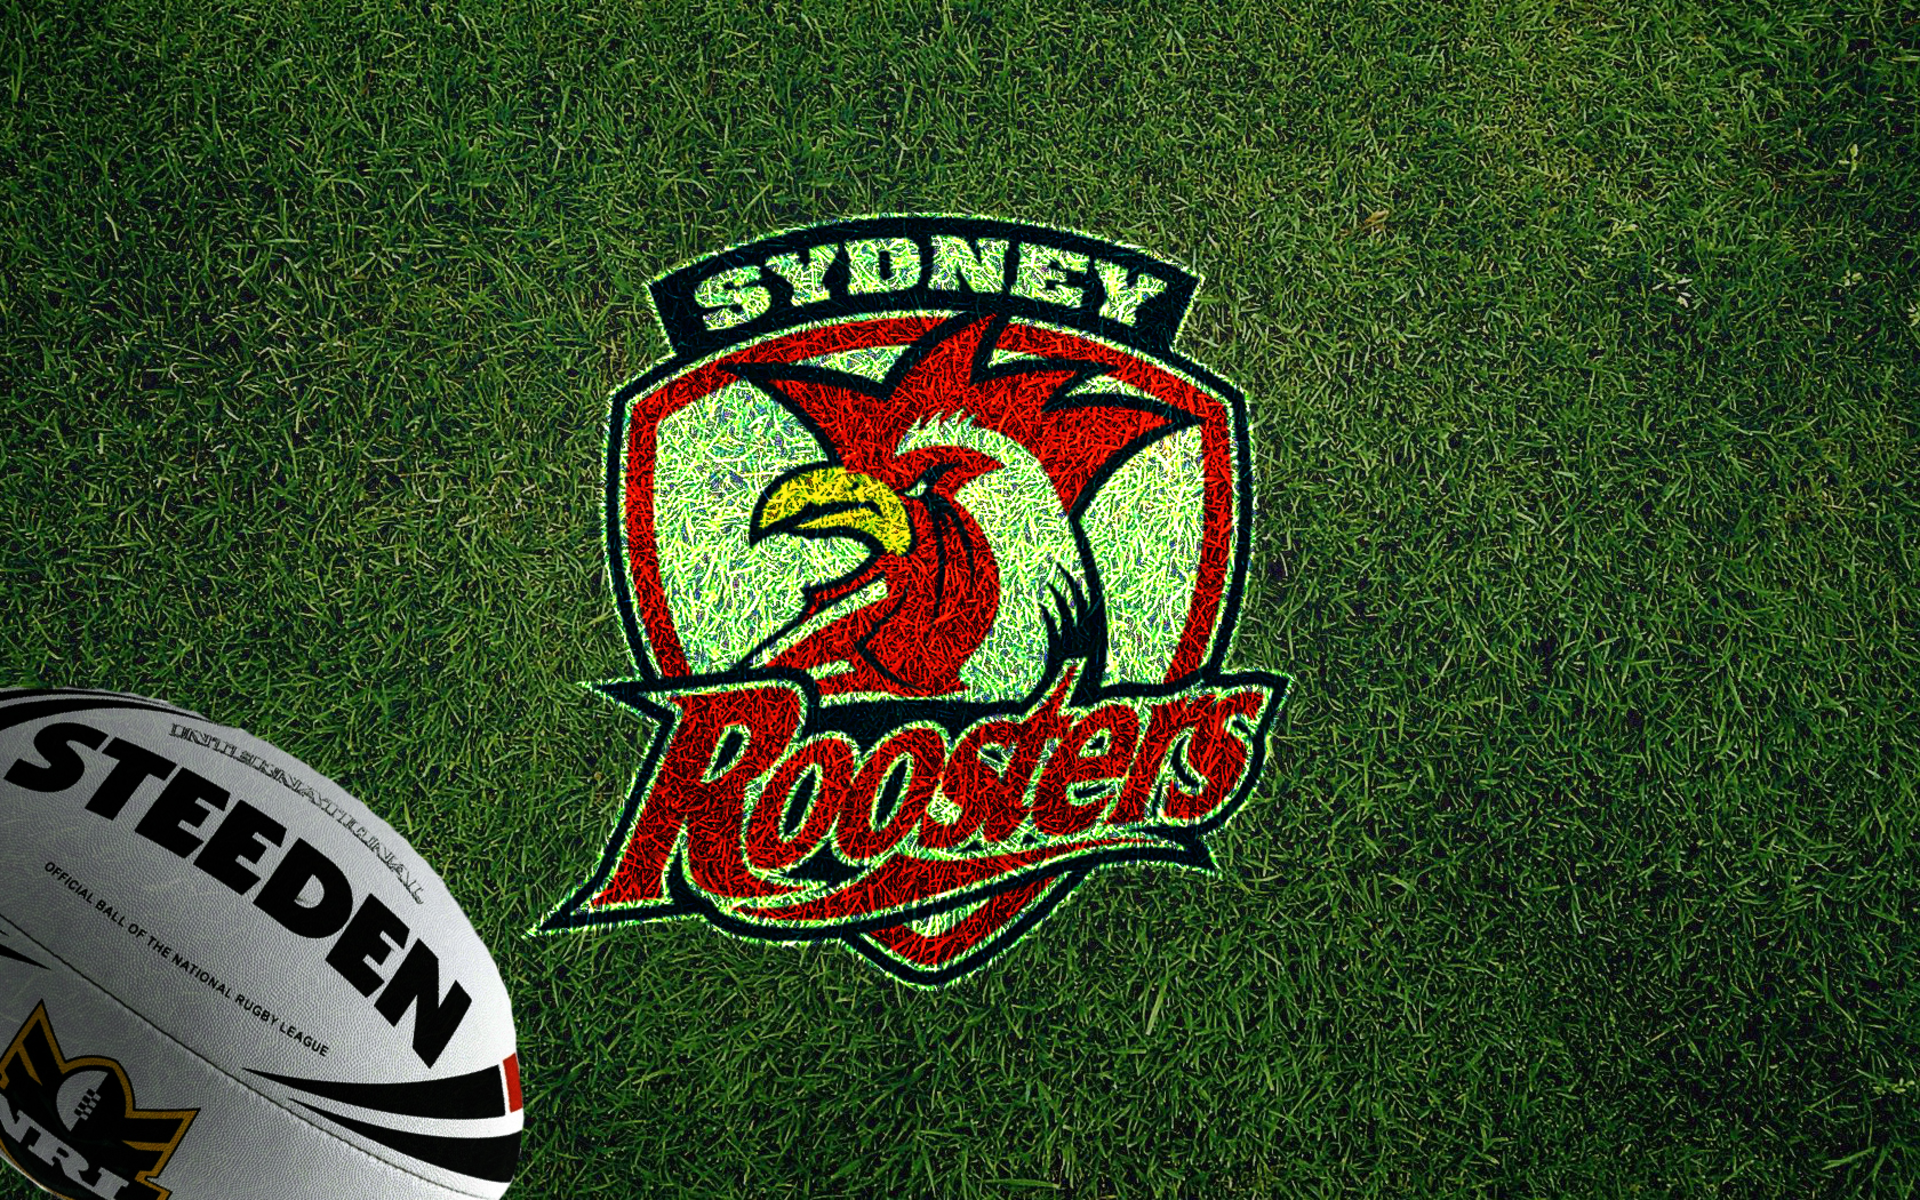 Sports Sydney Roosters HD Wallpaper | Background Image